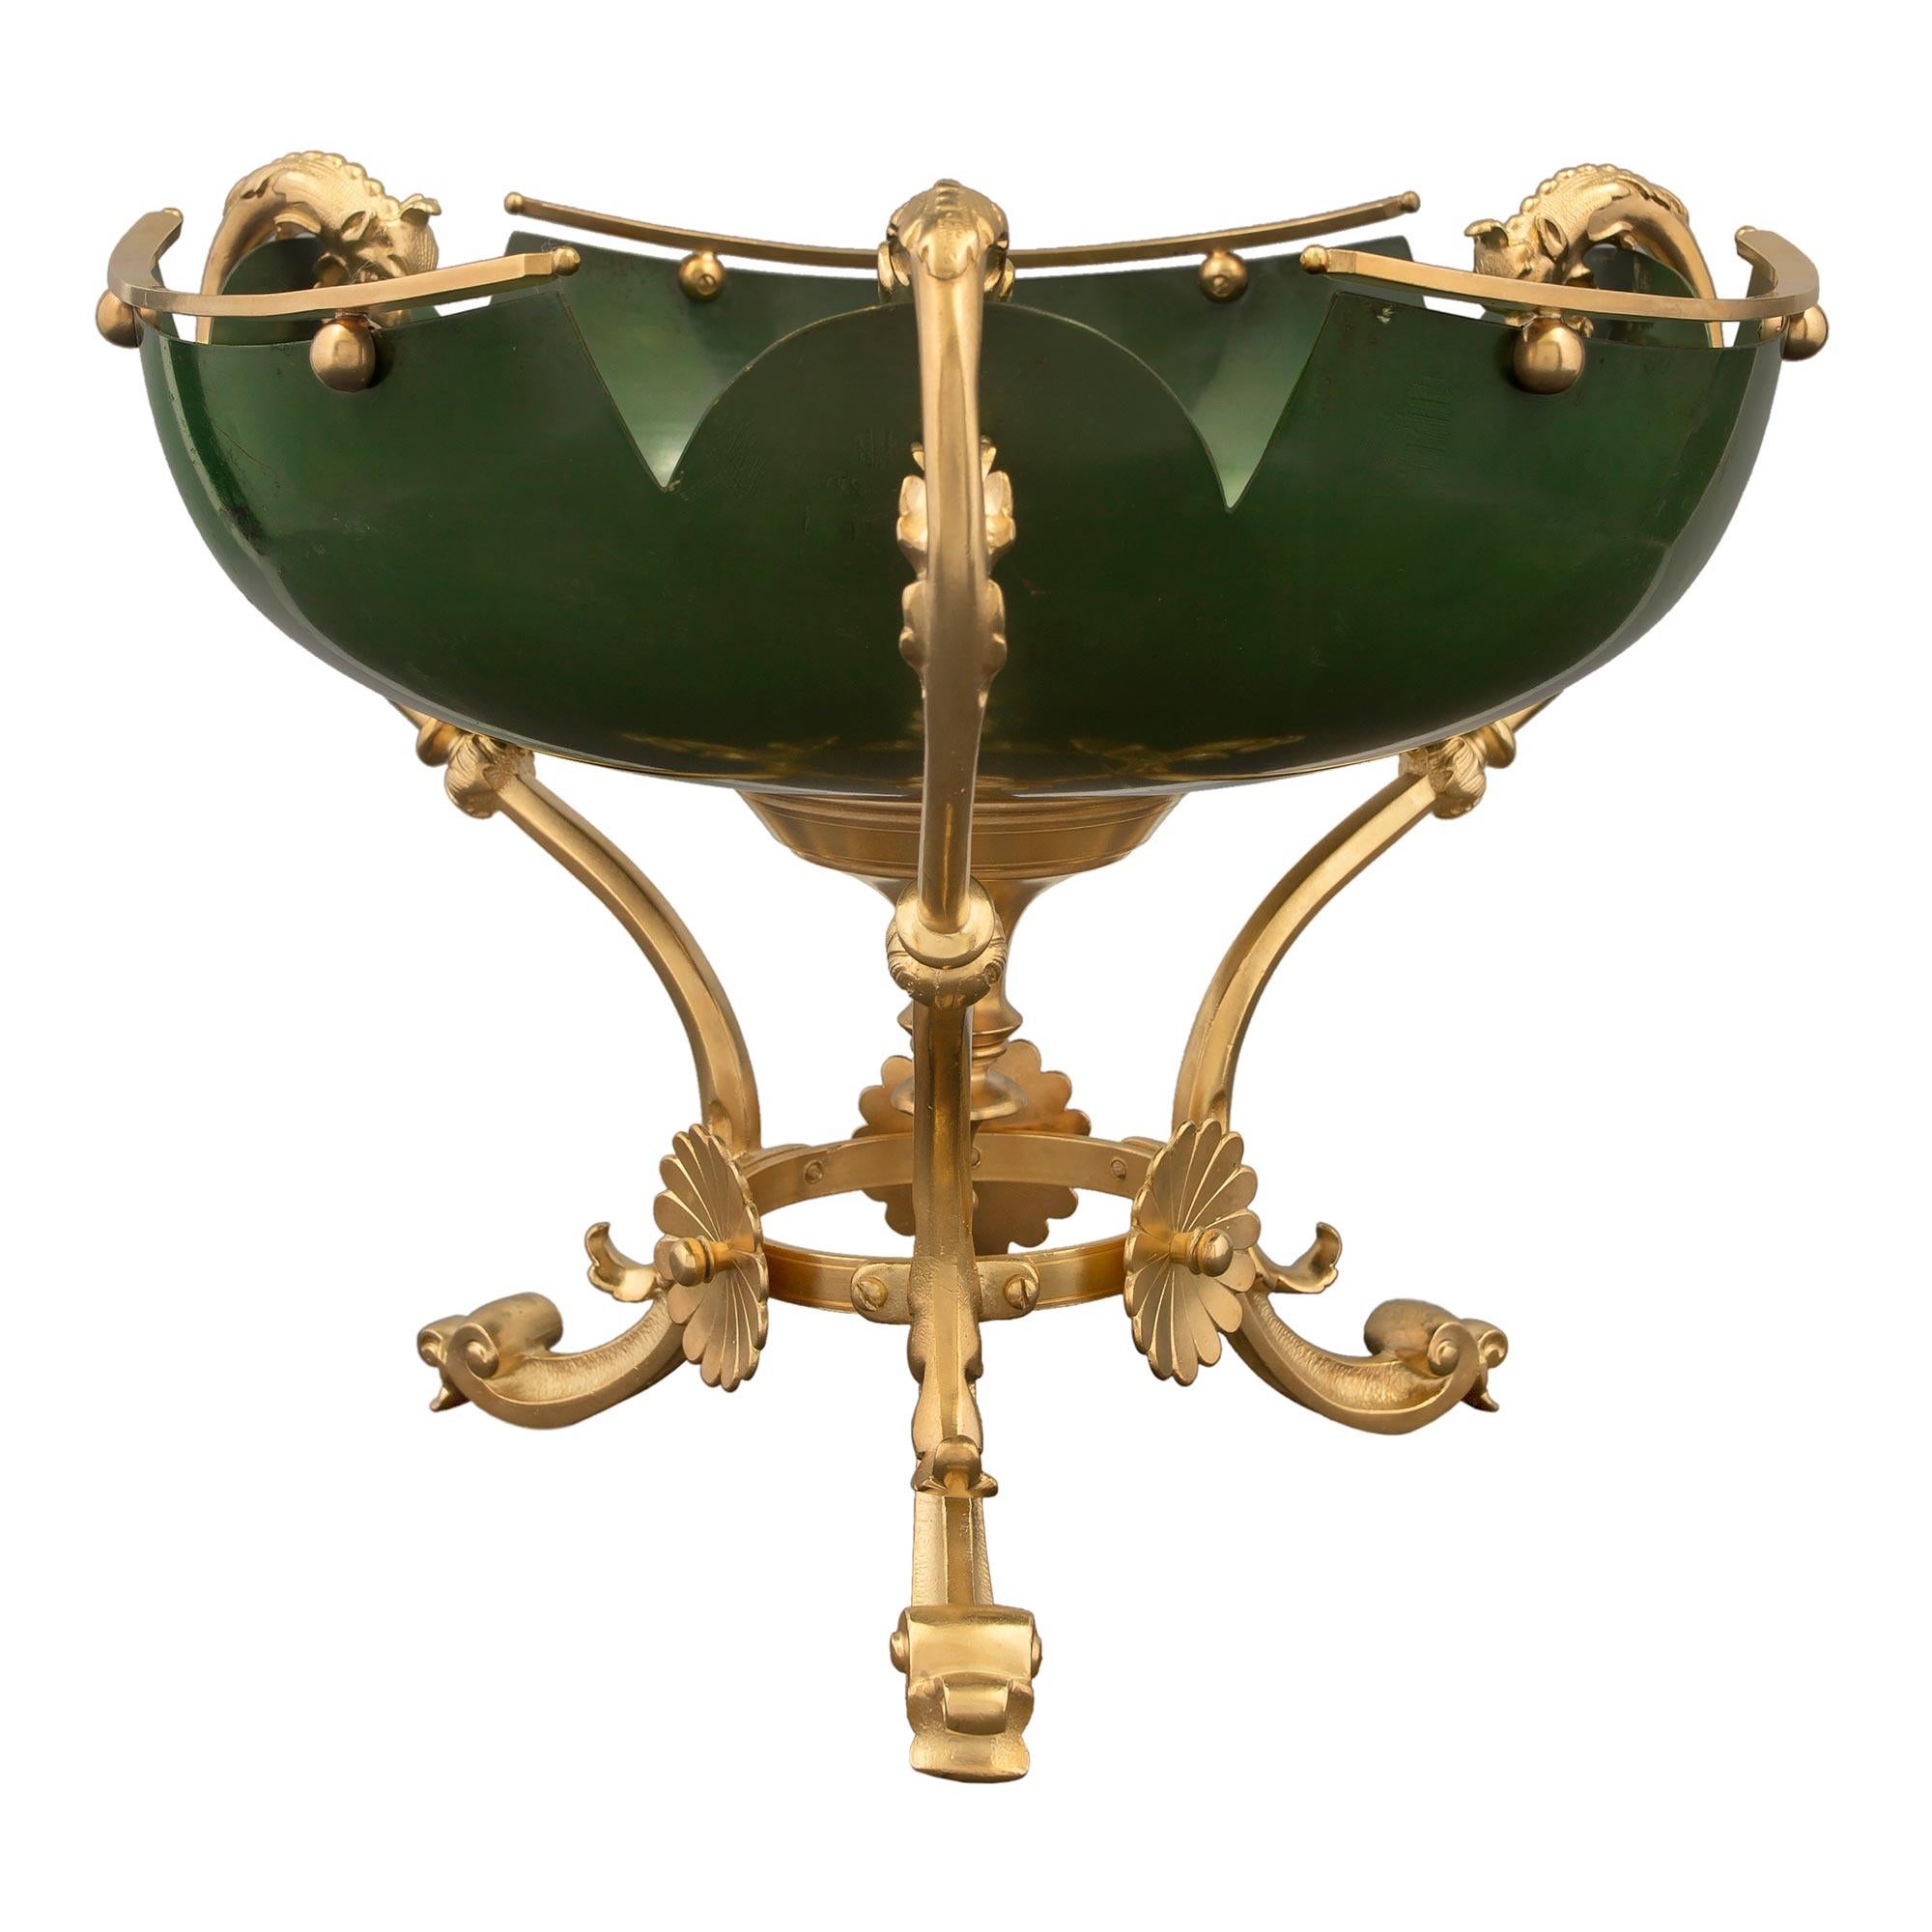 A striking and most uniquely shaped French 19th century Louis XVI st. ormolu and enamel centerpiece. The centerpiece is raised by three elegant scrolled ormolu supports, with fine foliate designs and a circular stretcher with beautiful floral